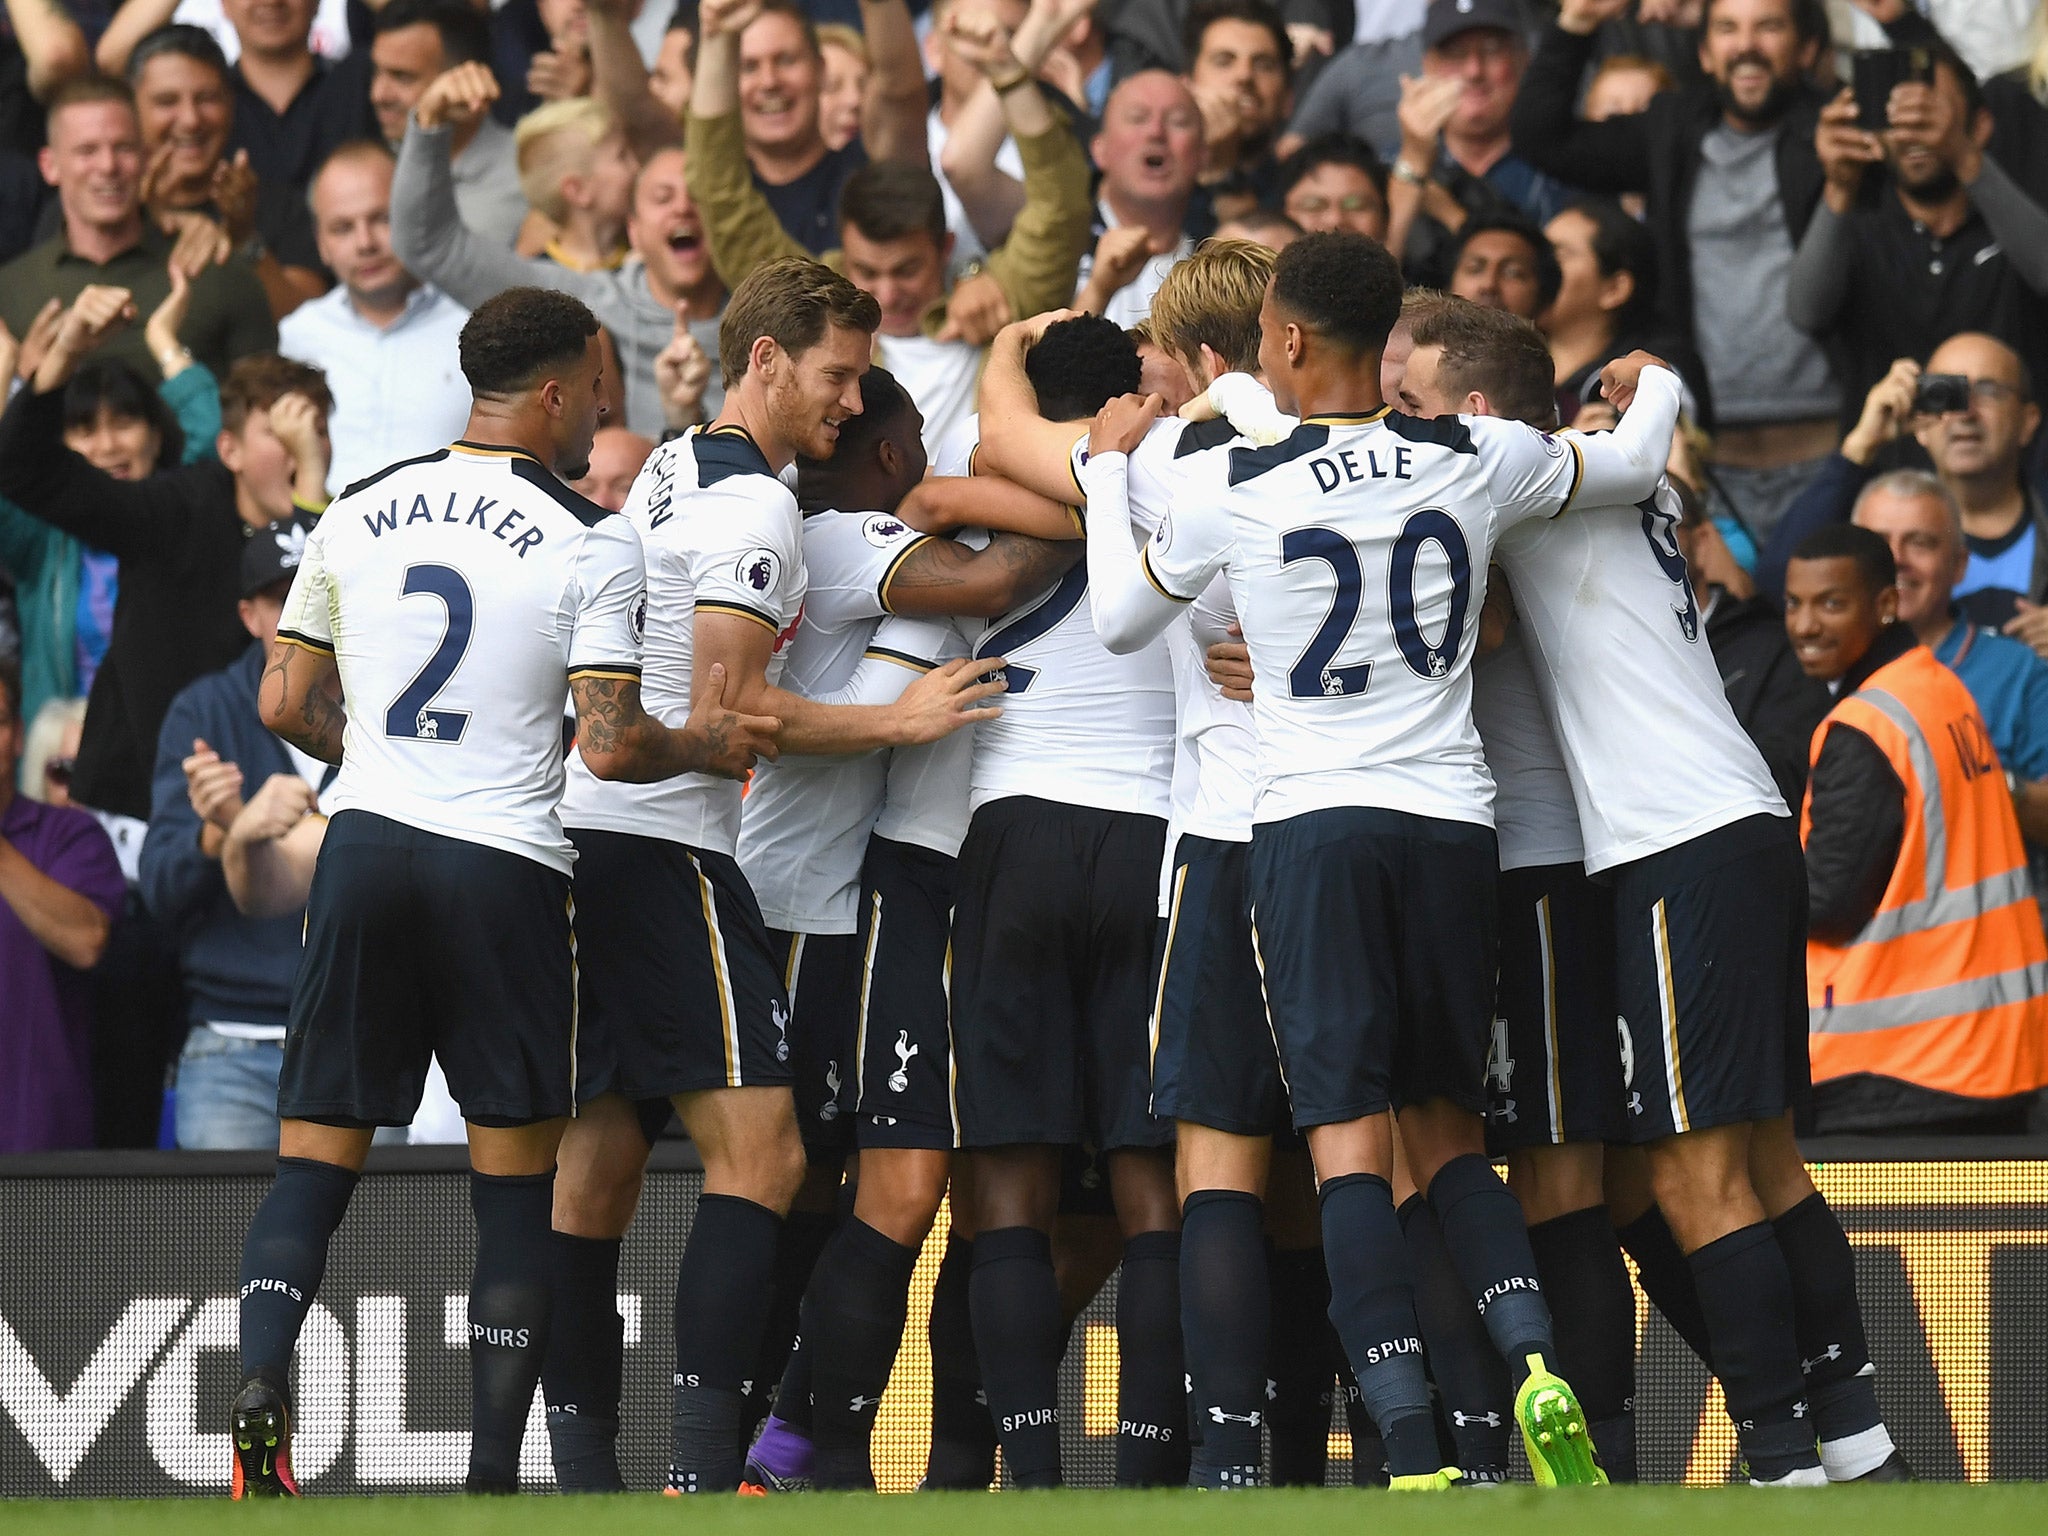 Tottenham players swarm Victor Wanyama after he scored what proved to be the match-winner